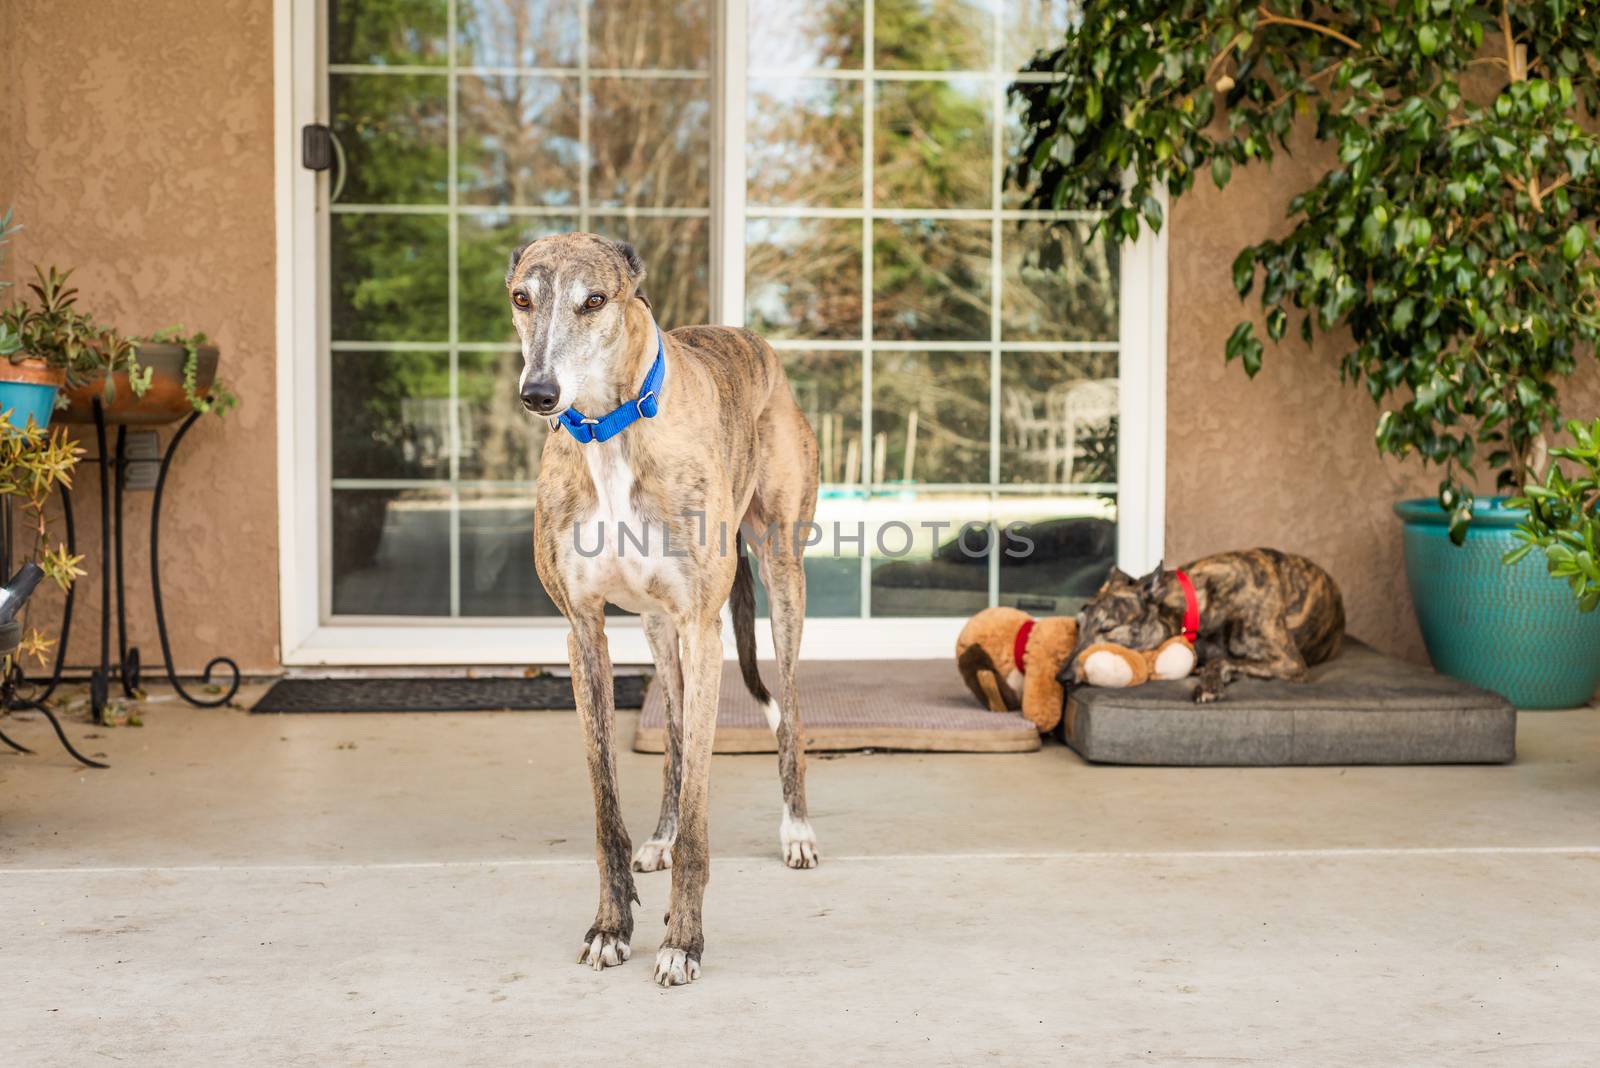 Two rescued Greyhounds, former blood dogs, in their adoptive home by Pendleton